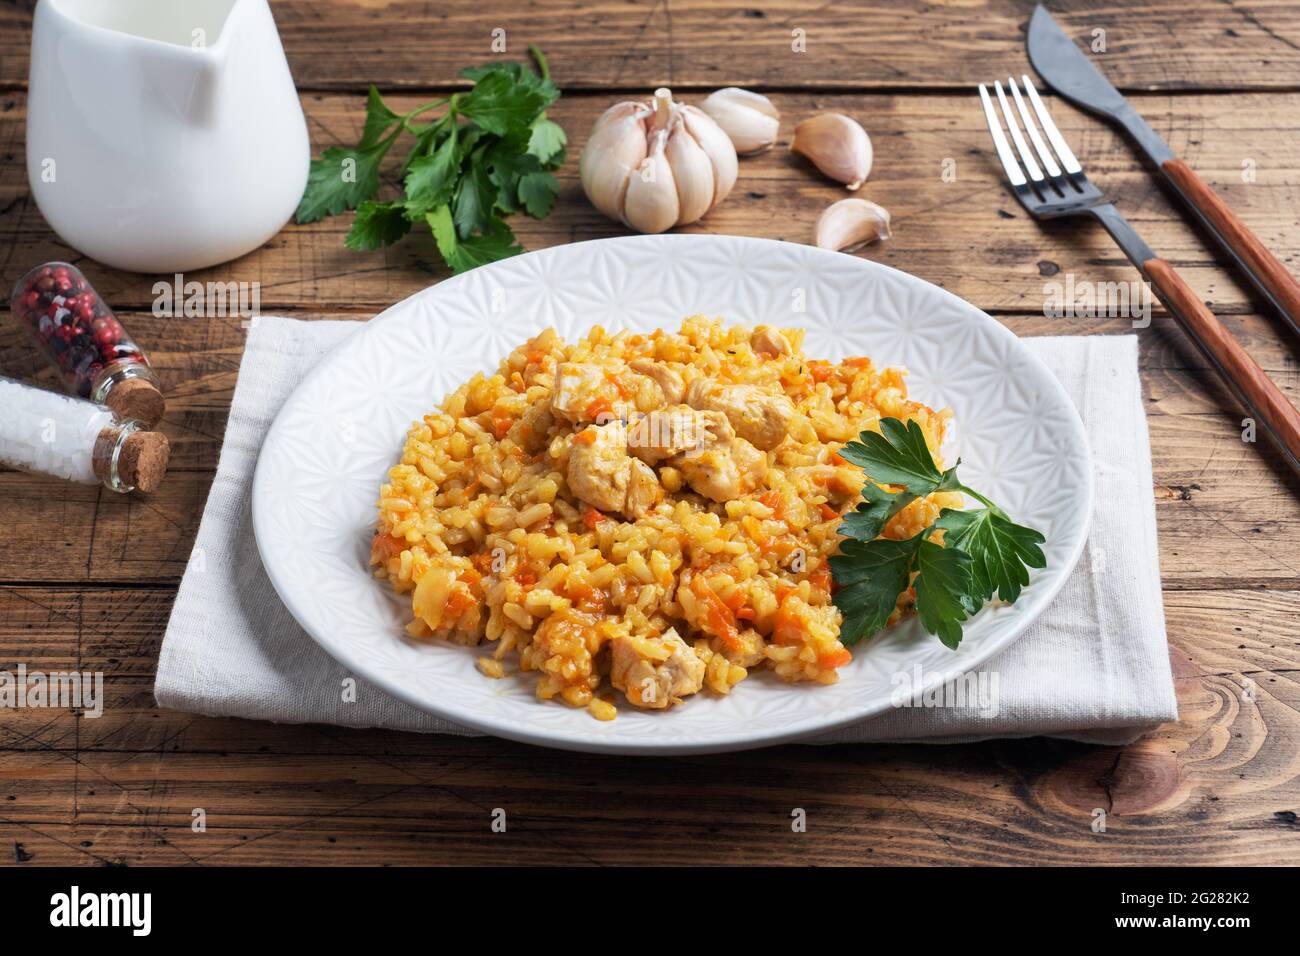 Delicious Asian pilaf, stewed rice with vegetables and chicken on a plate. Wooden rustic background Stock Photo